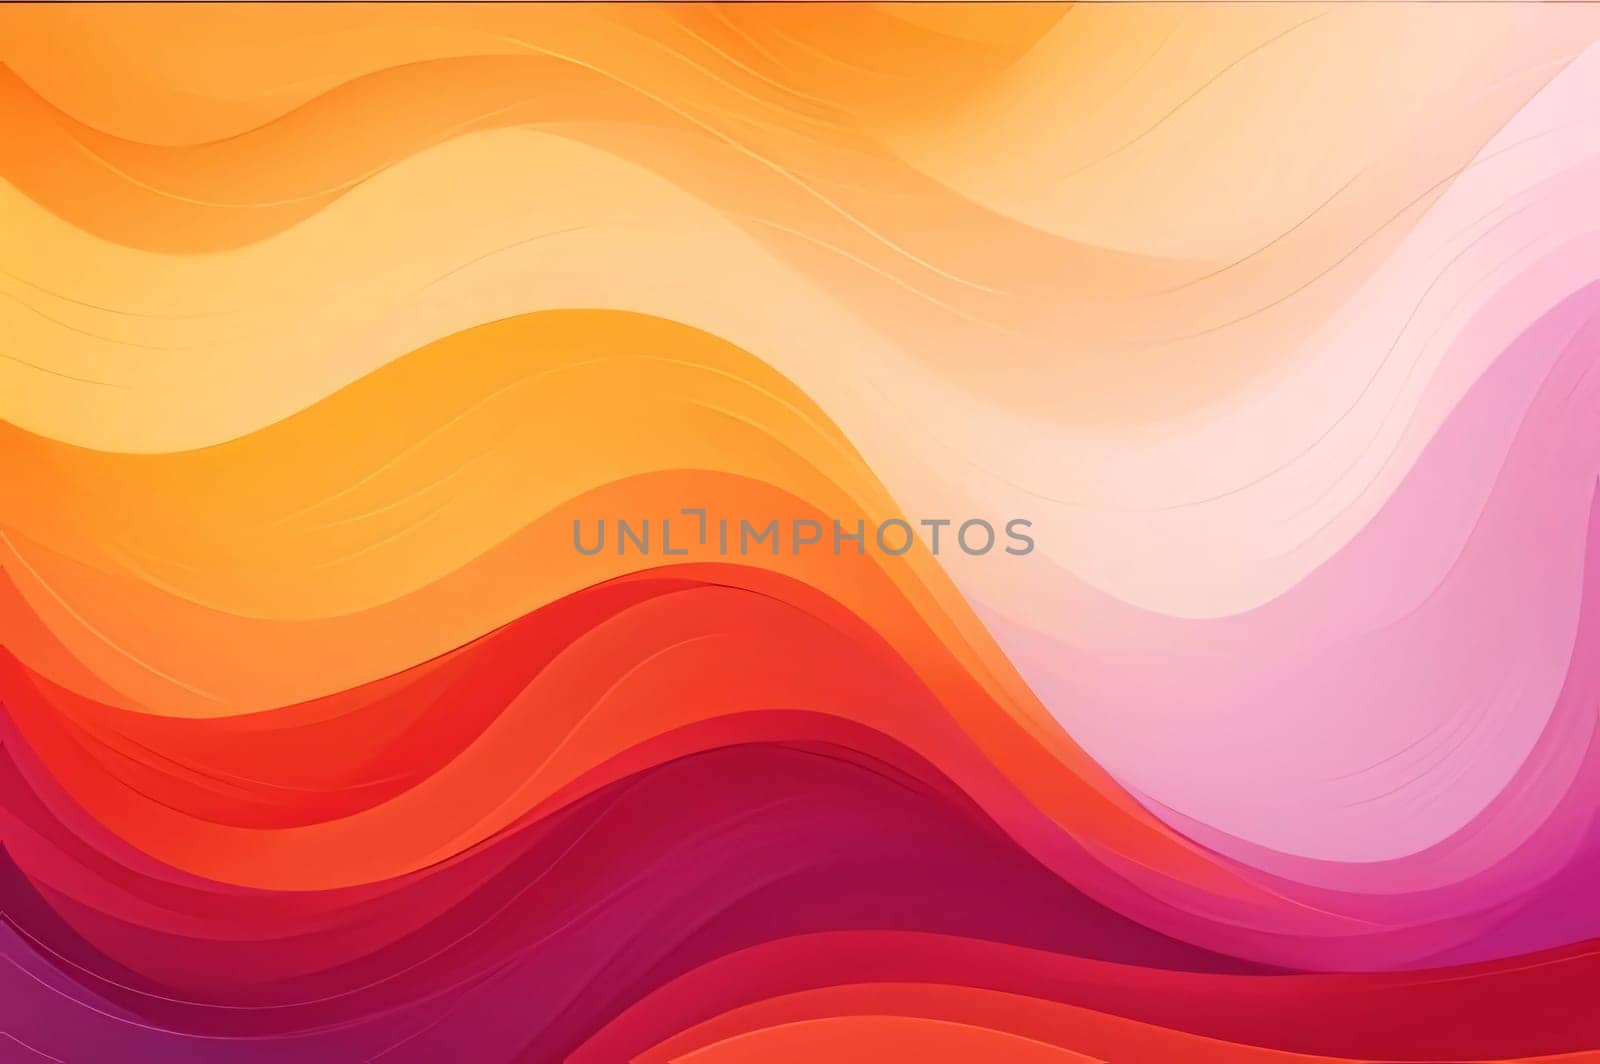 Abstract background design: abstract background with smooth lines in orange, yellow and pink colors